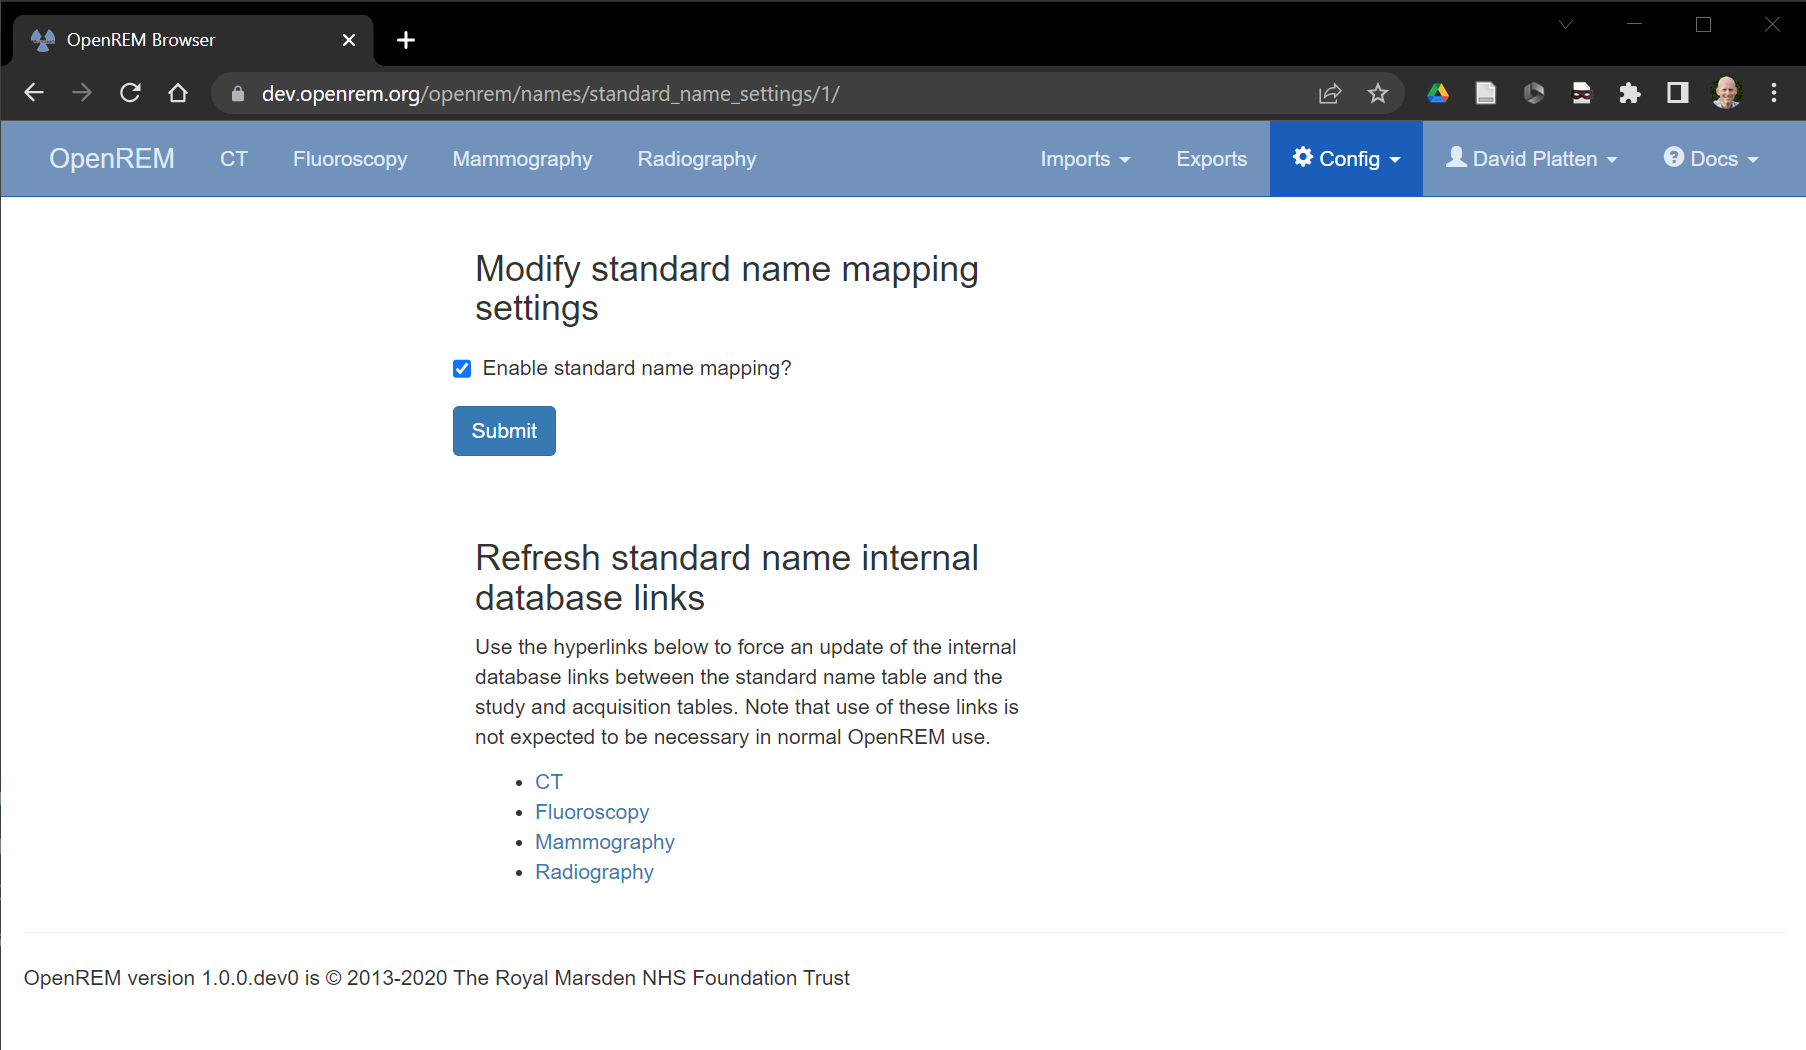 The standard name mapping settings page